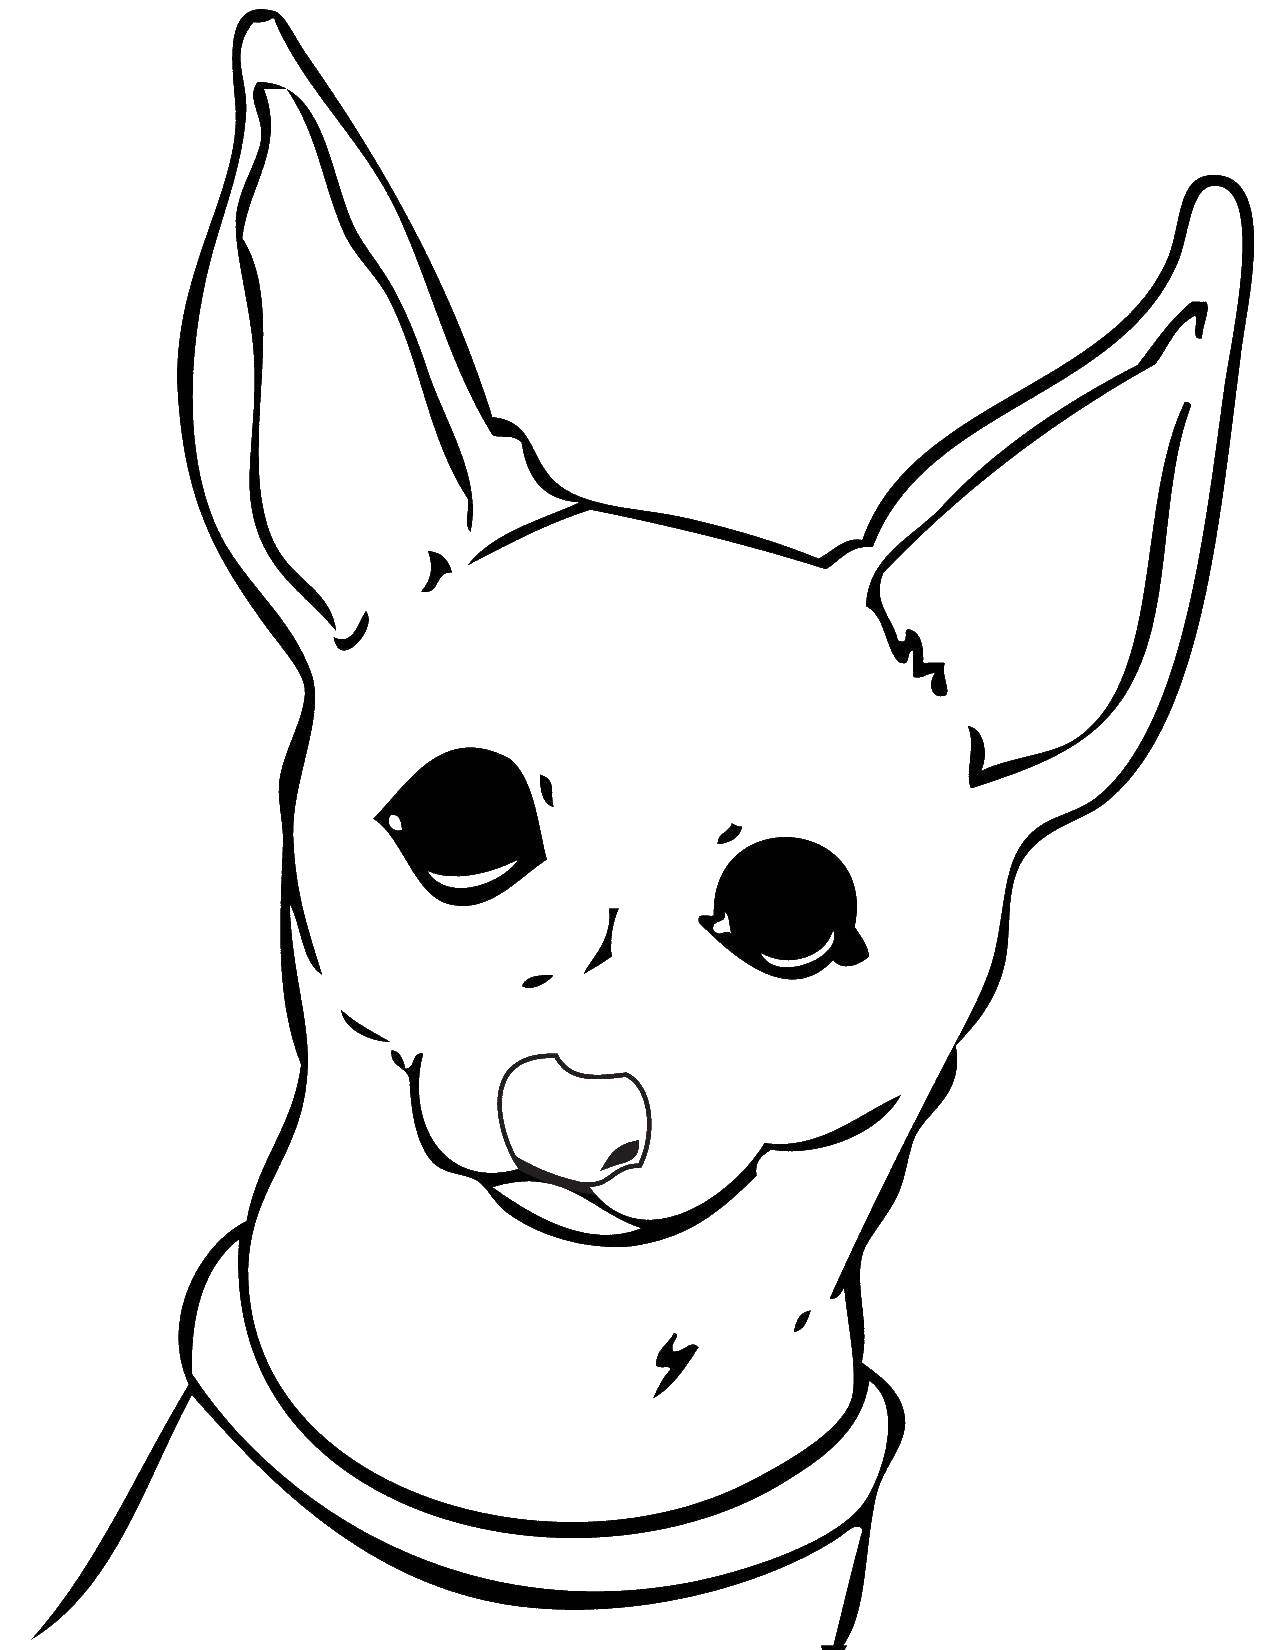 Coloring Chihuahua dog. Category dogs. Tags:  dog, Chihuahua, ears.